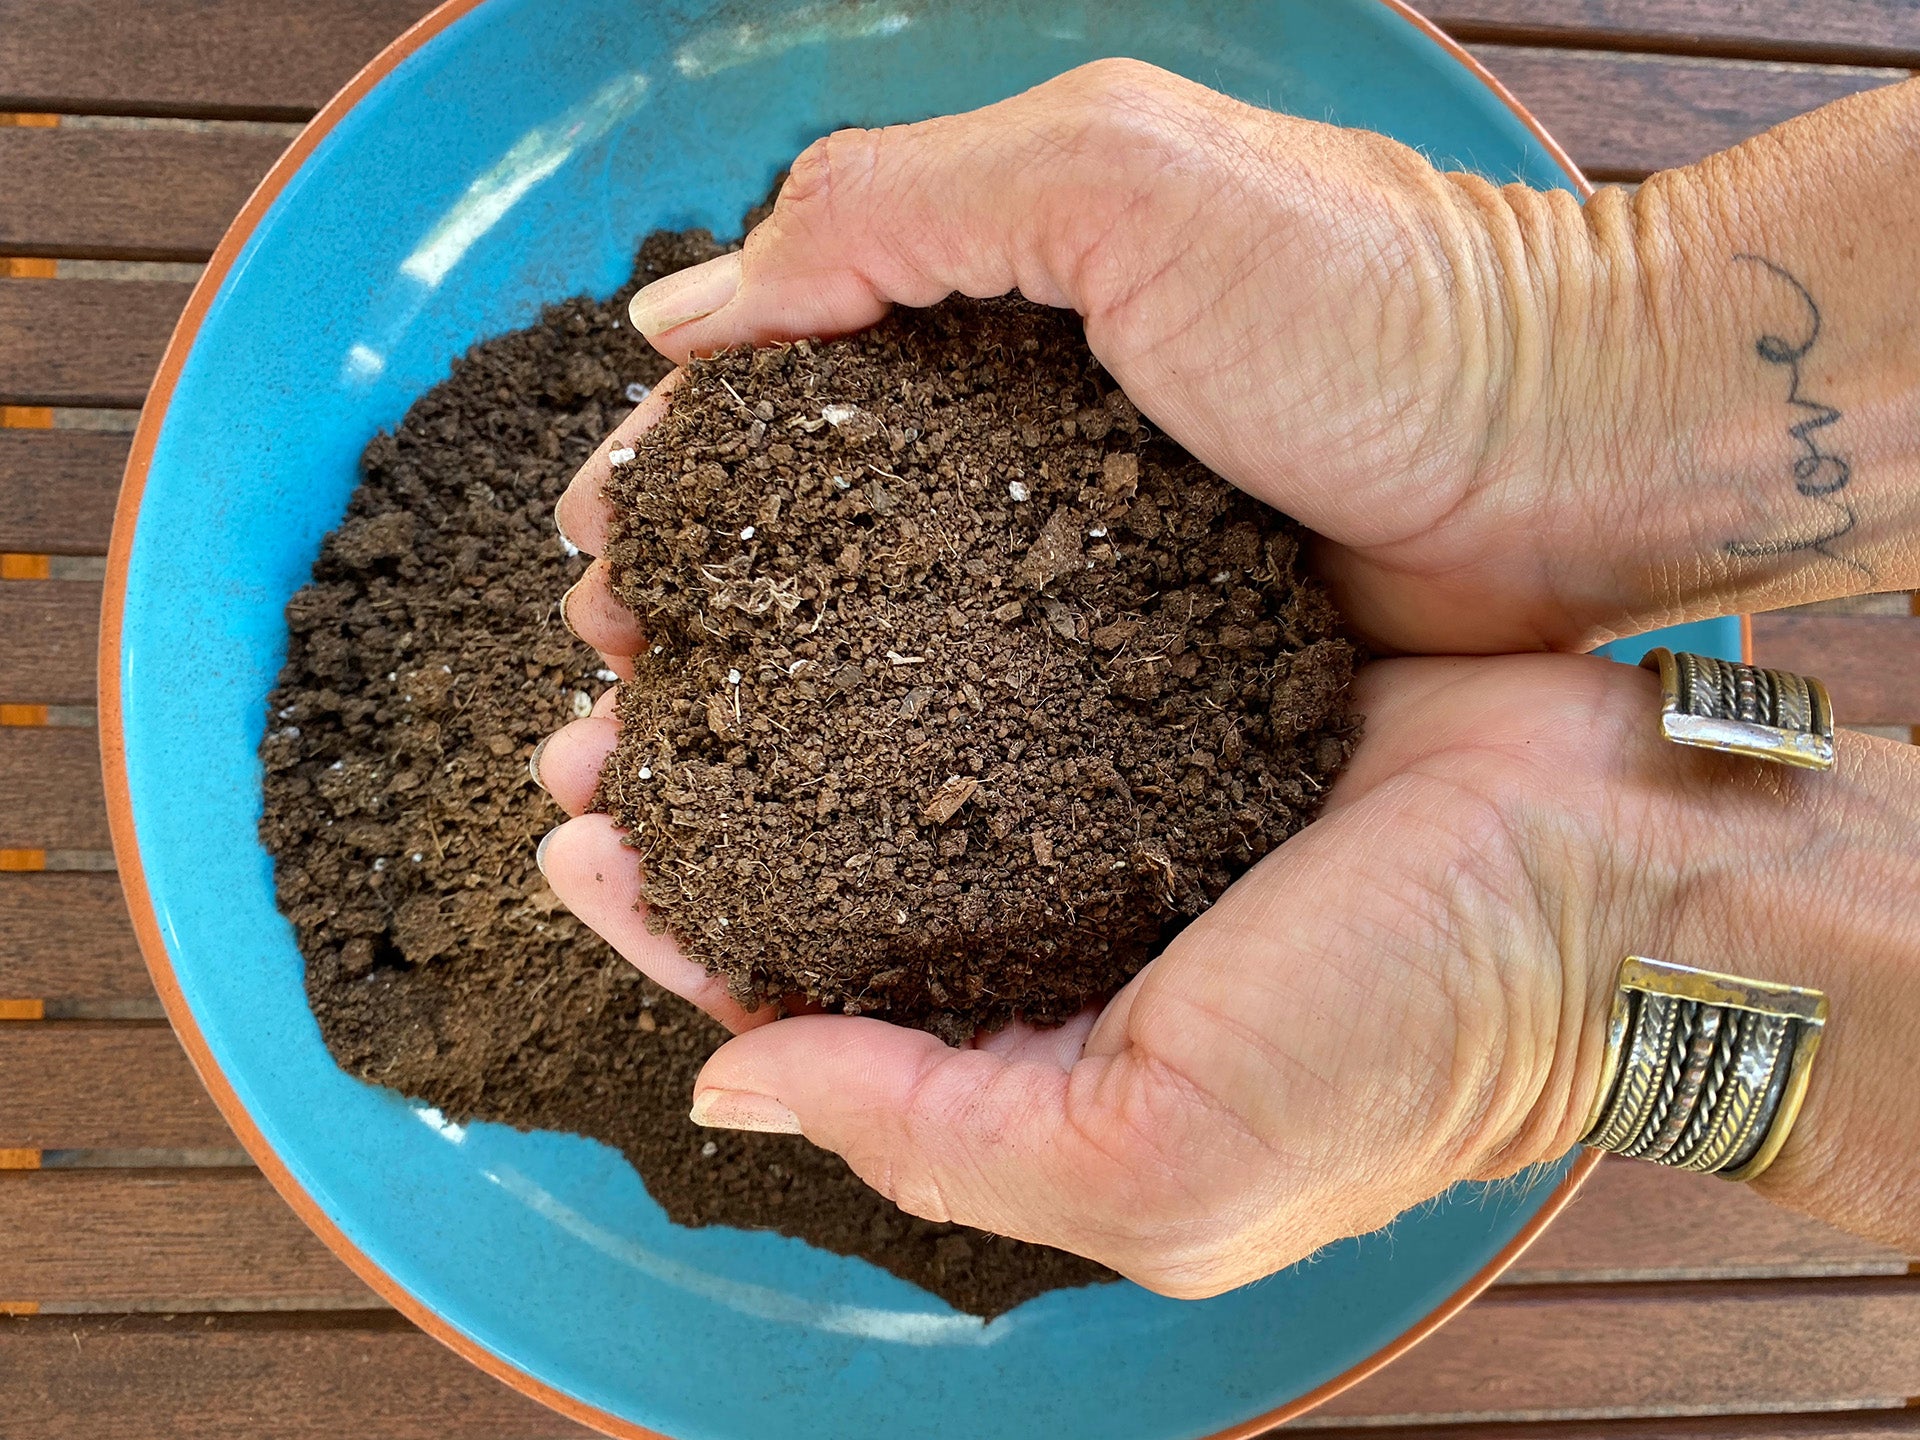 Two hands lifting potted soil from a bowl